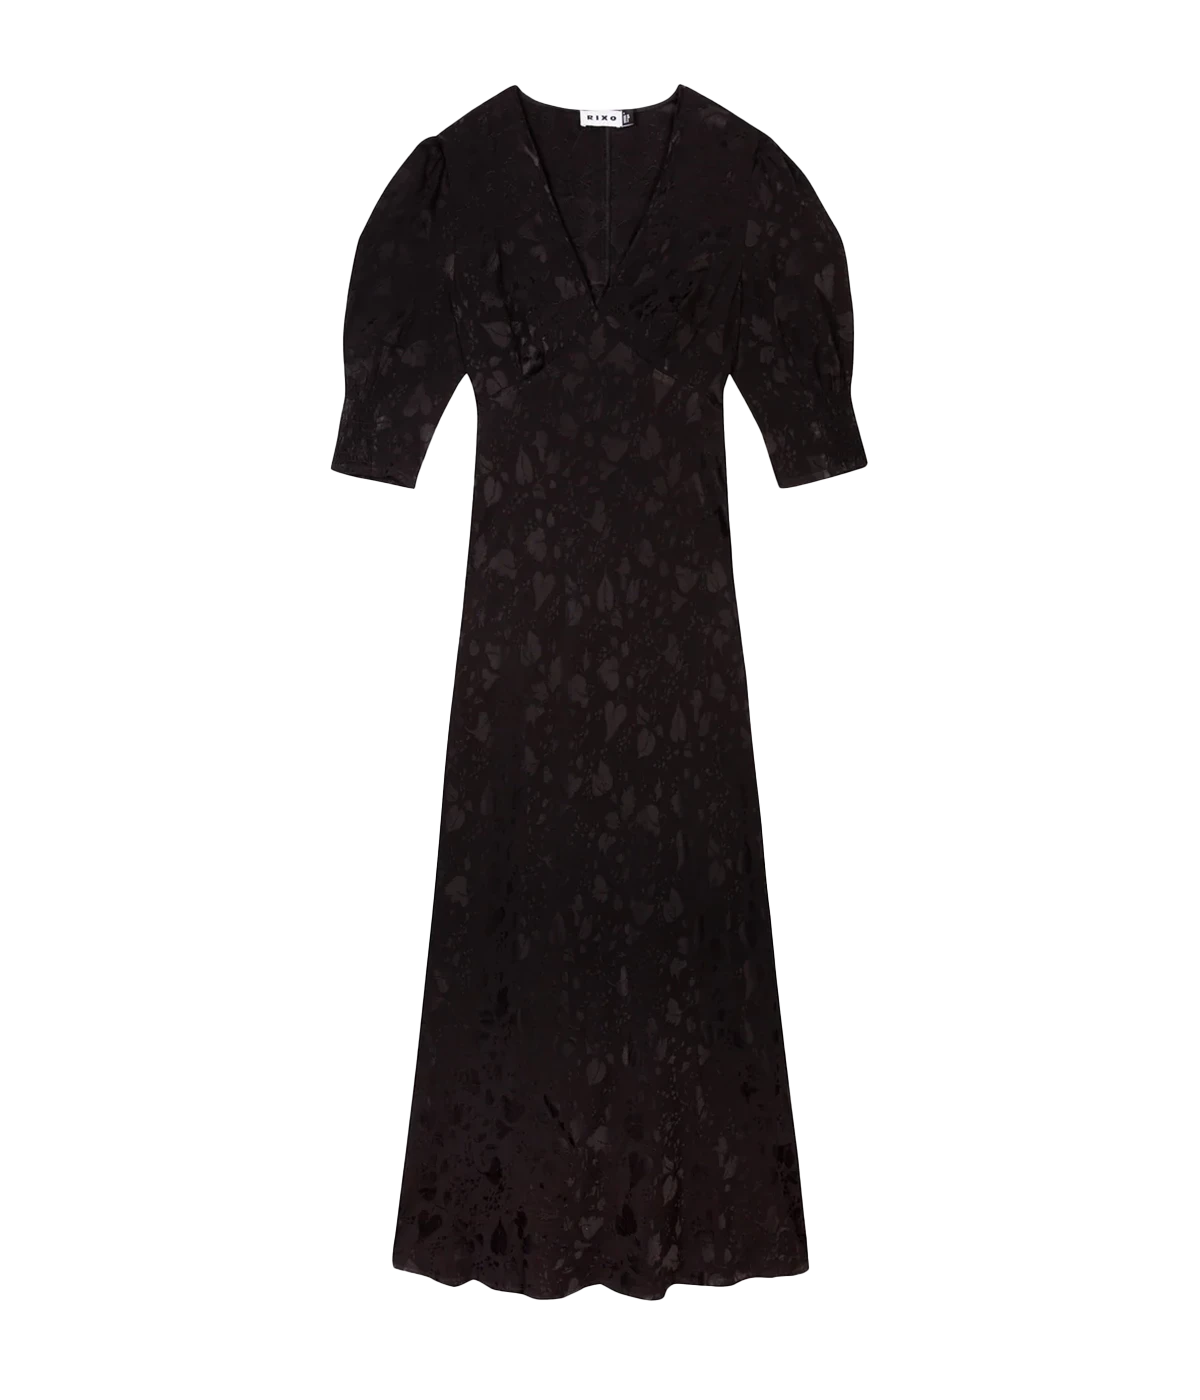 A casual long lunch dress in black and floral texture, featuring a v neckline, cut on bias, puff sleeves, zip closure, vintage inspired. Bra Friendly, comfortable, throw on and go, little black dress, made in UK. 